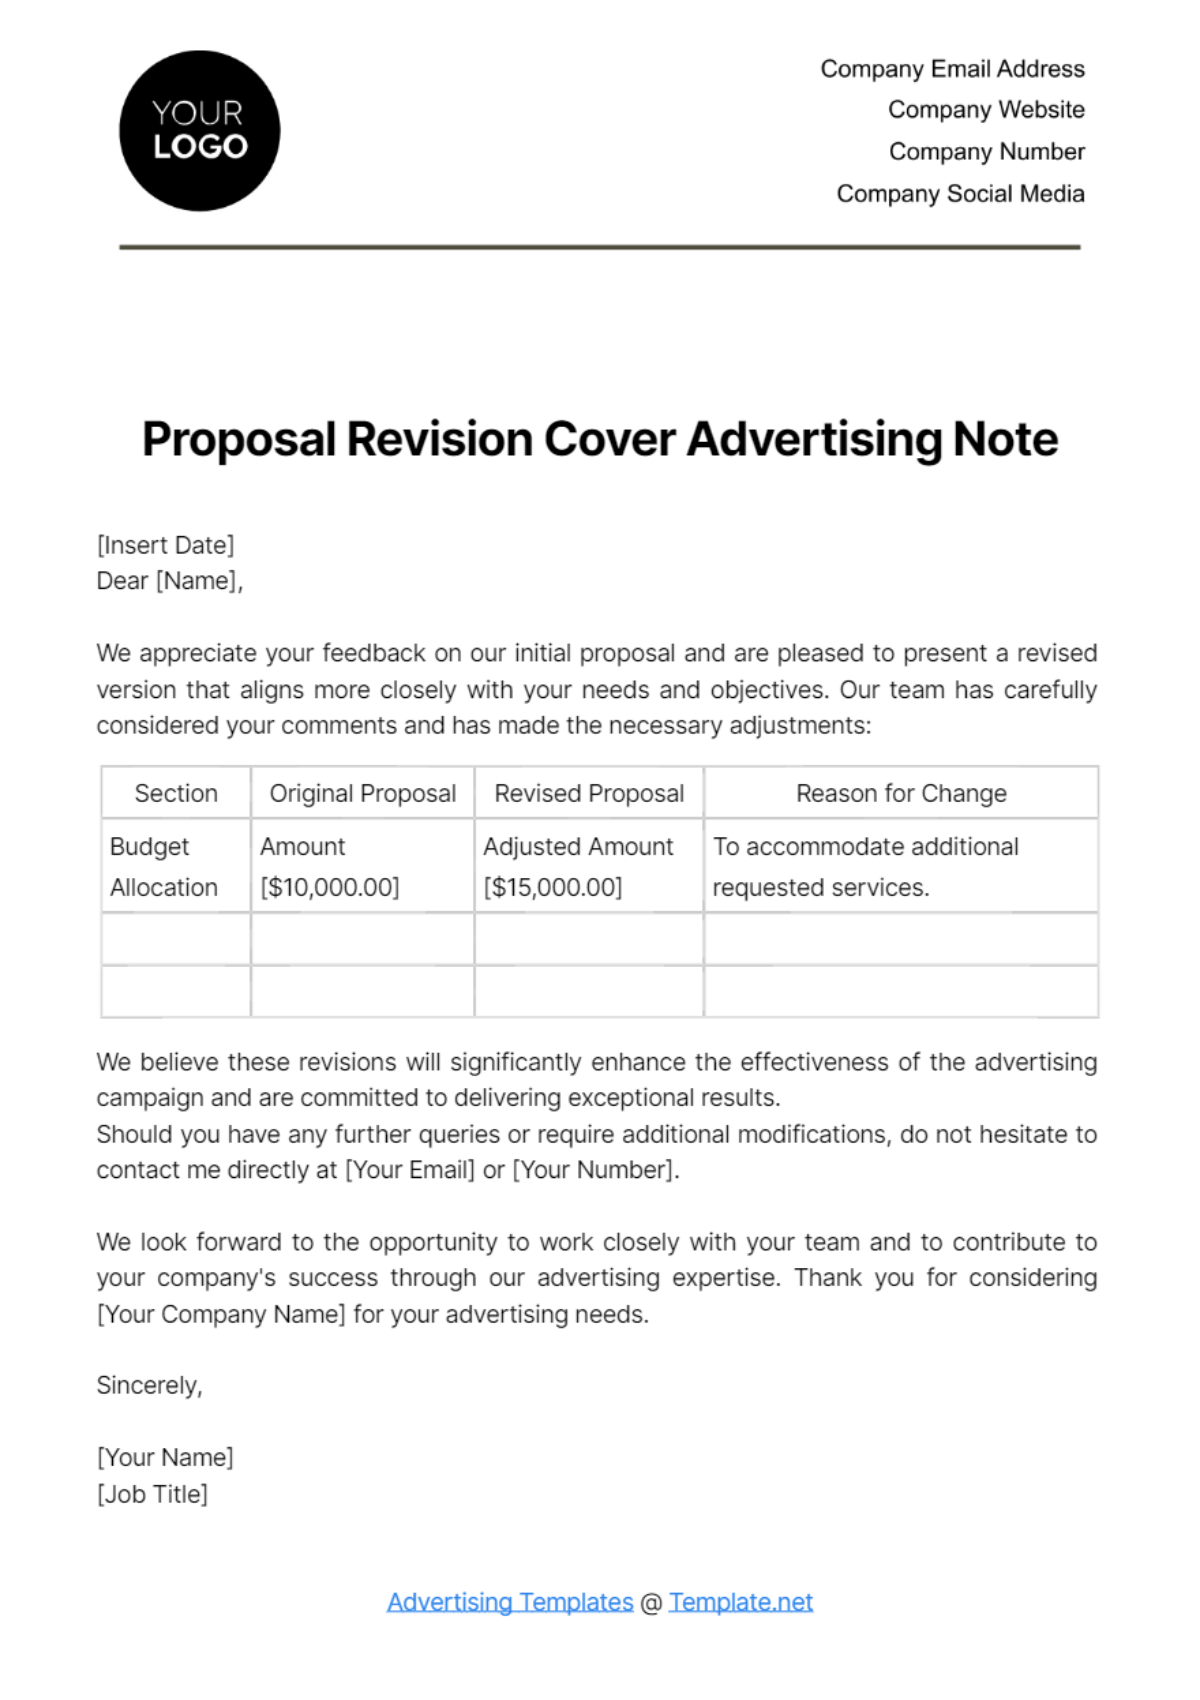 Proposal Revision Cover Advertising Note Template